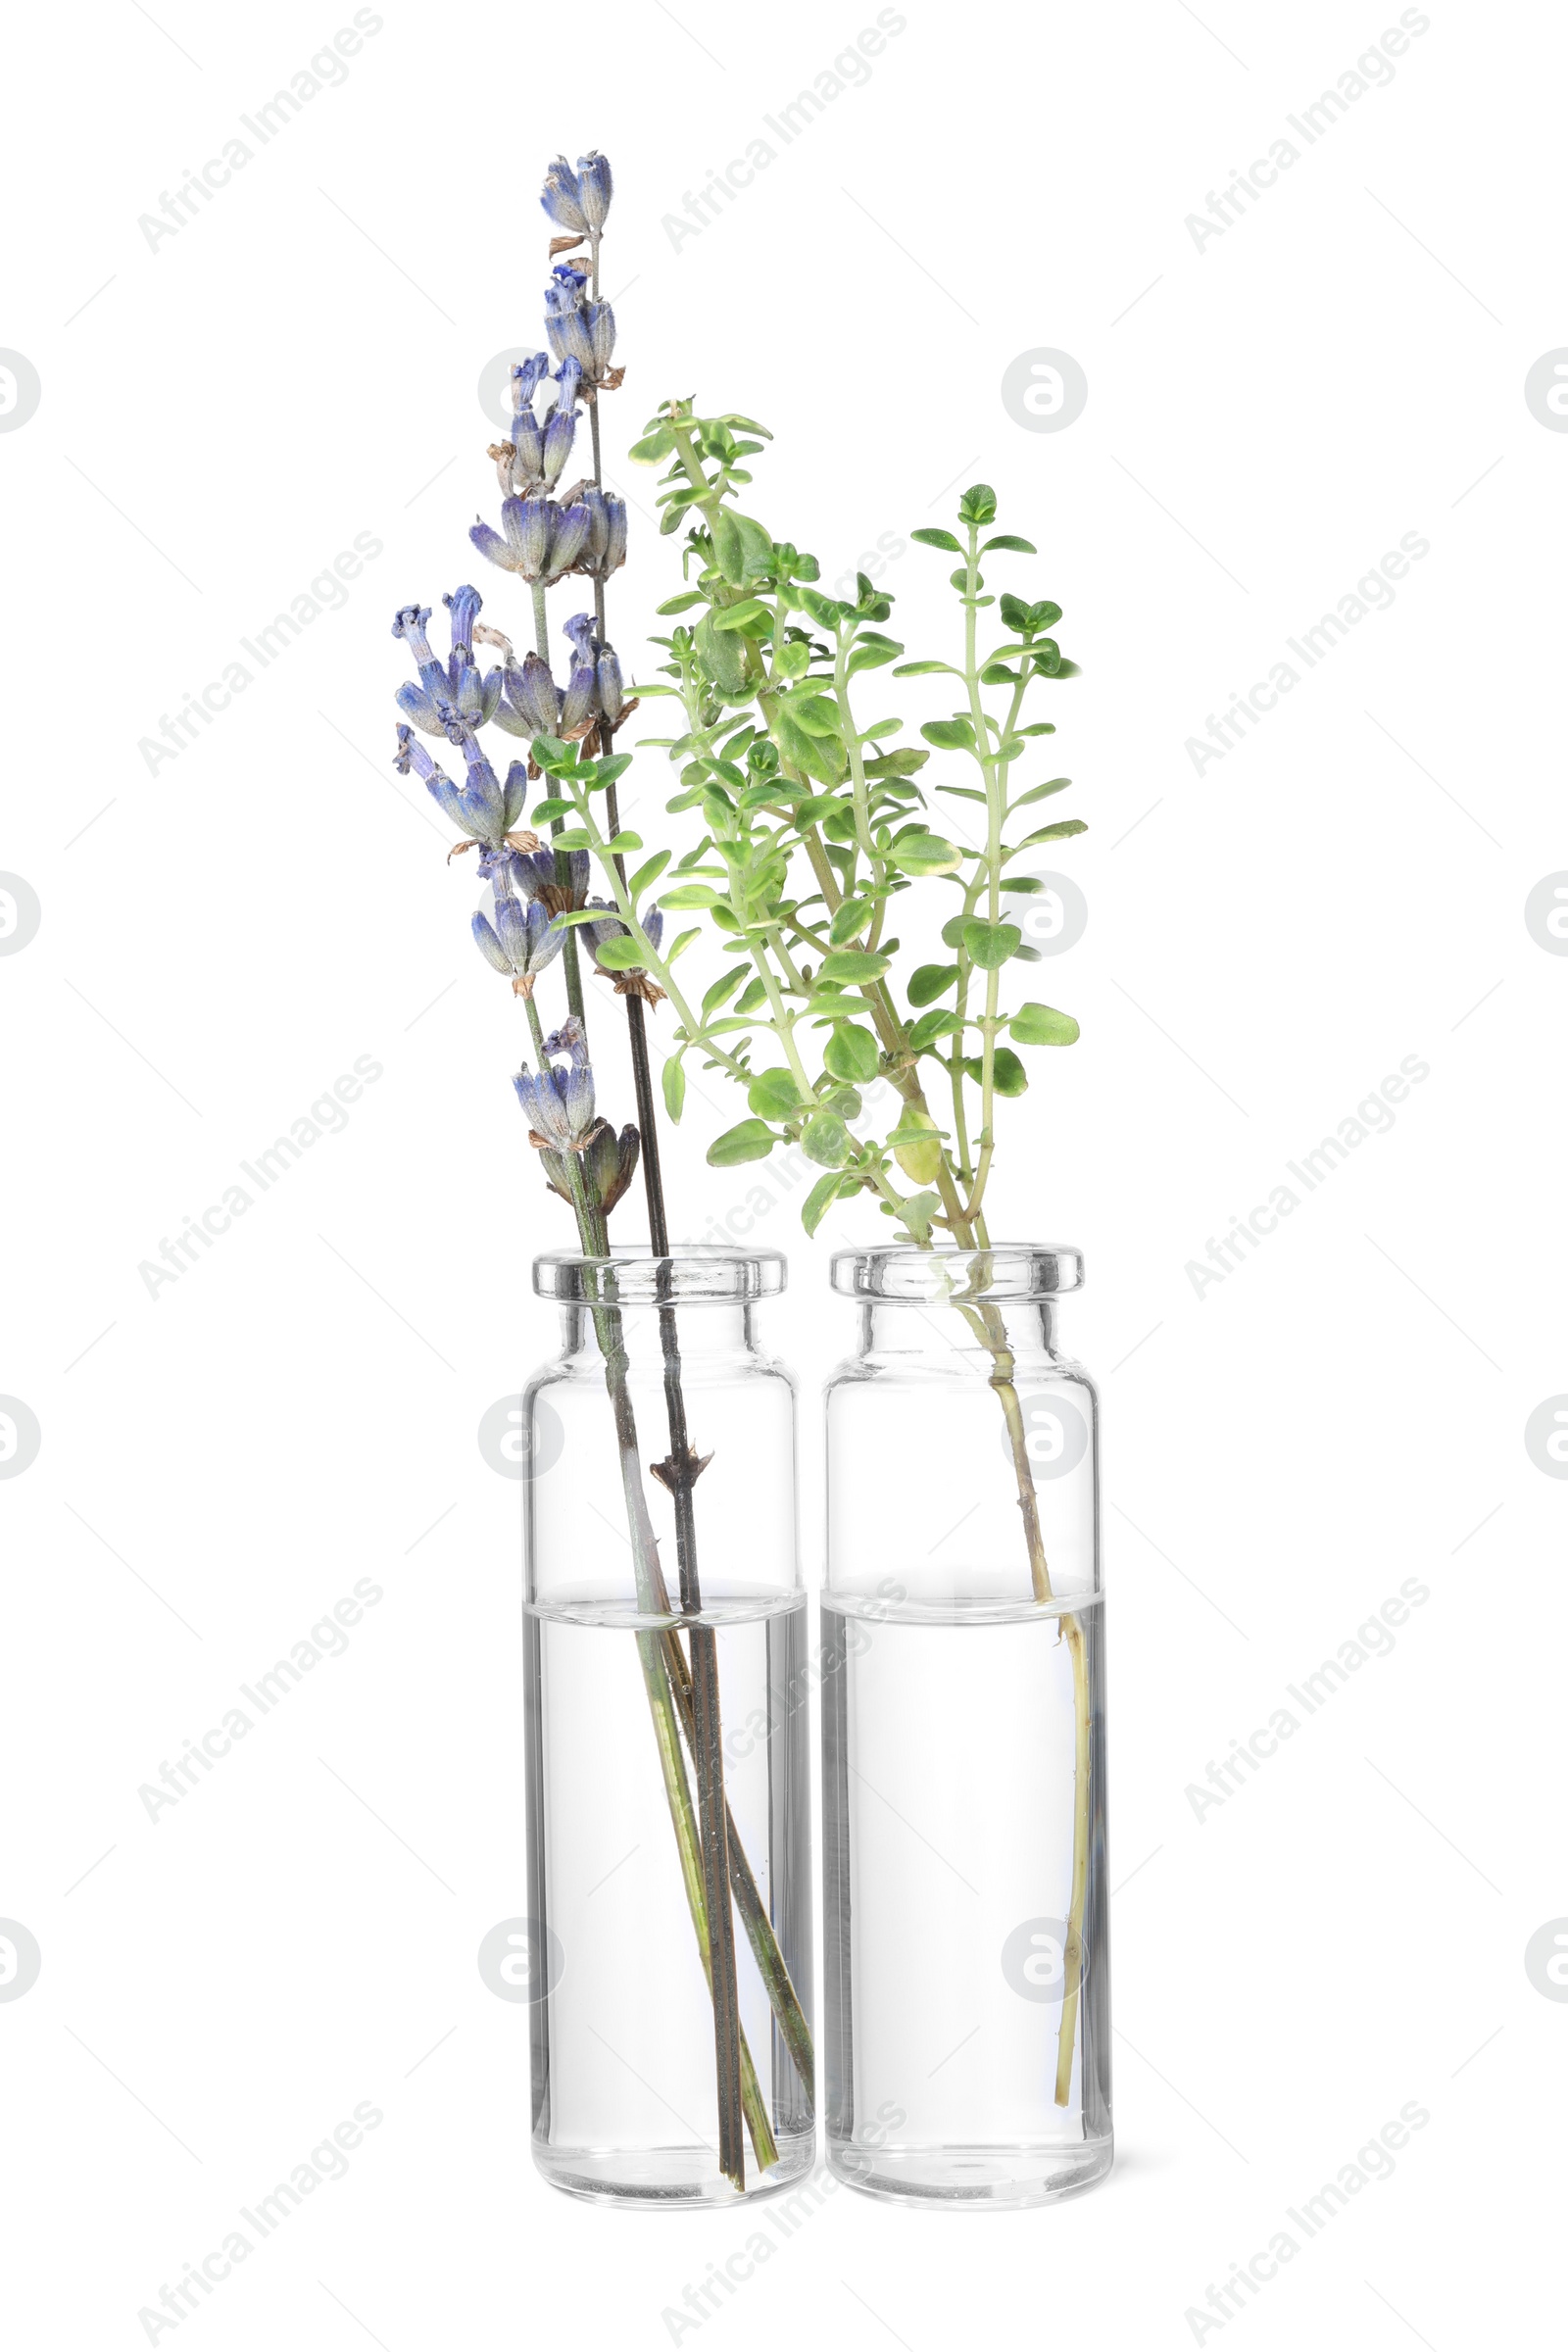 Photo of Bottles with essential oils, lavender and thyme isolated on white